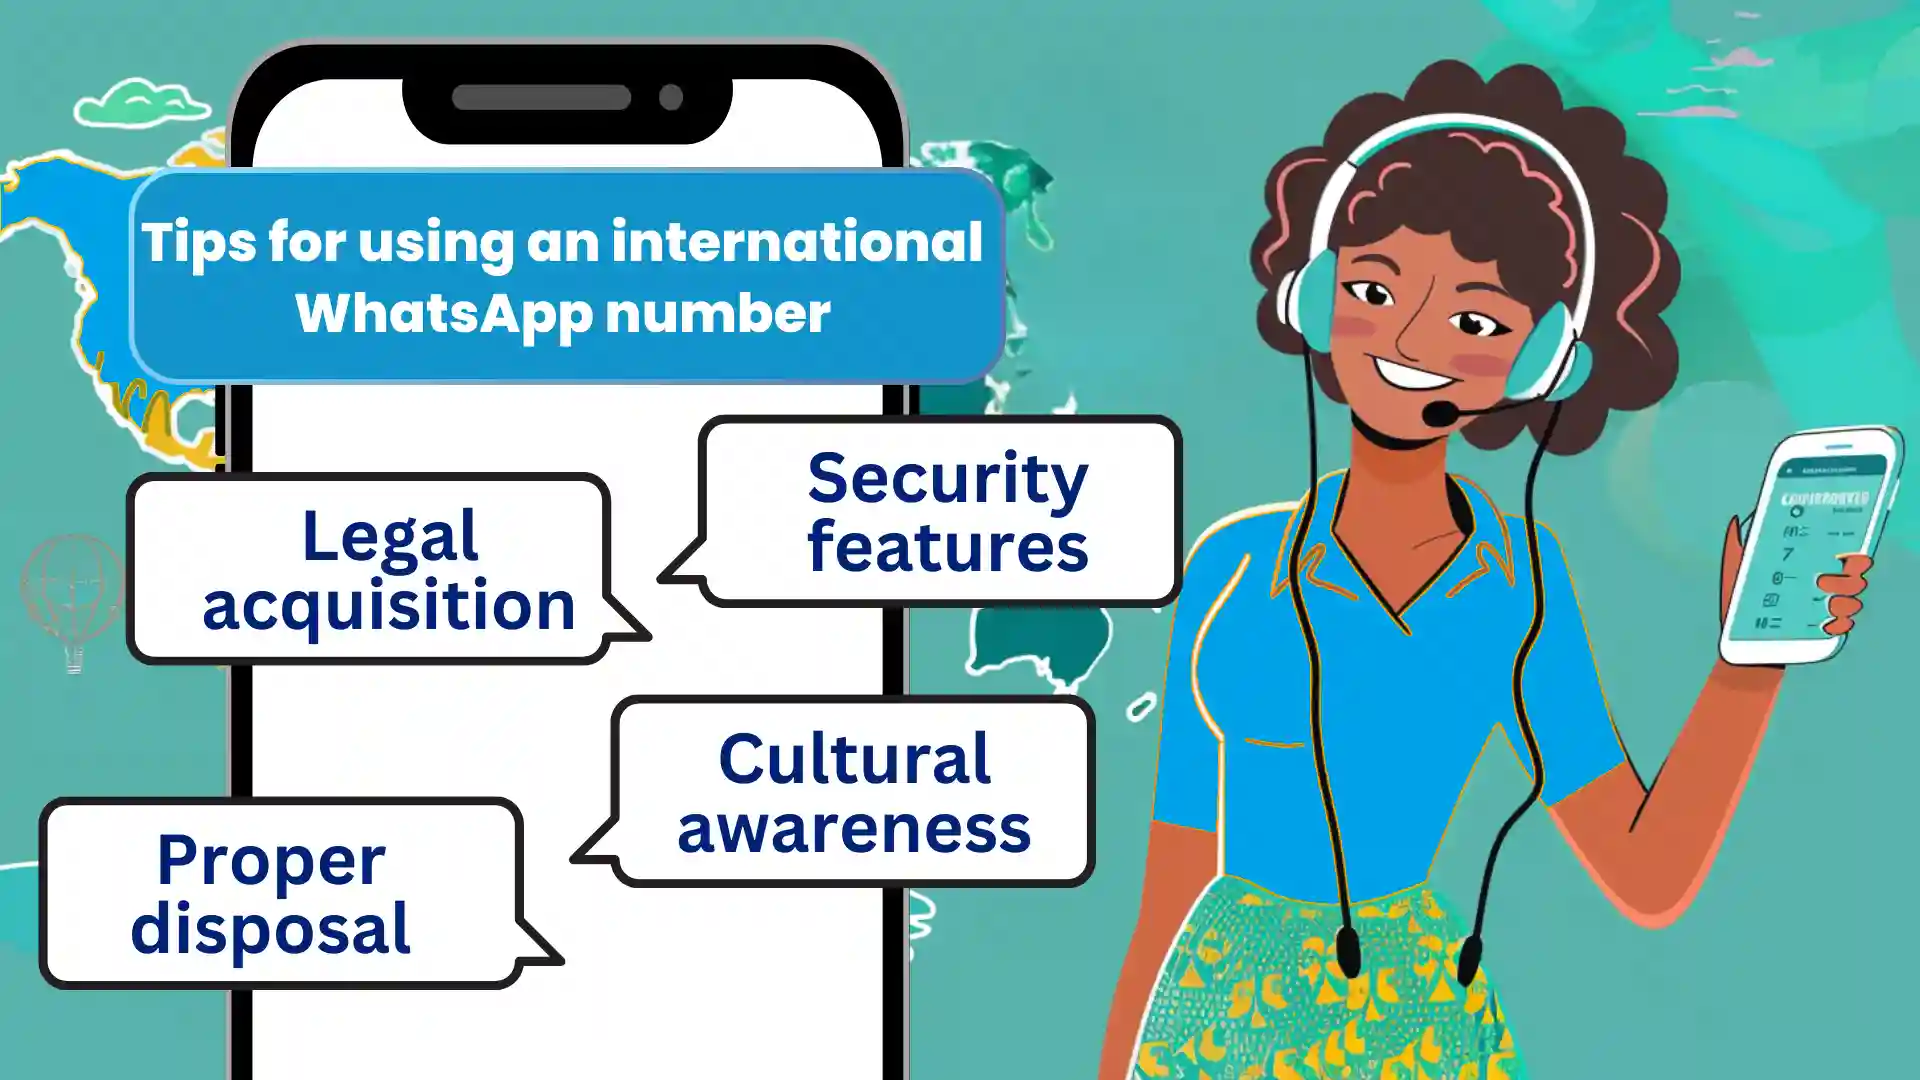 Tips for using an international WhatsApp number